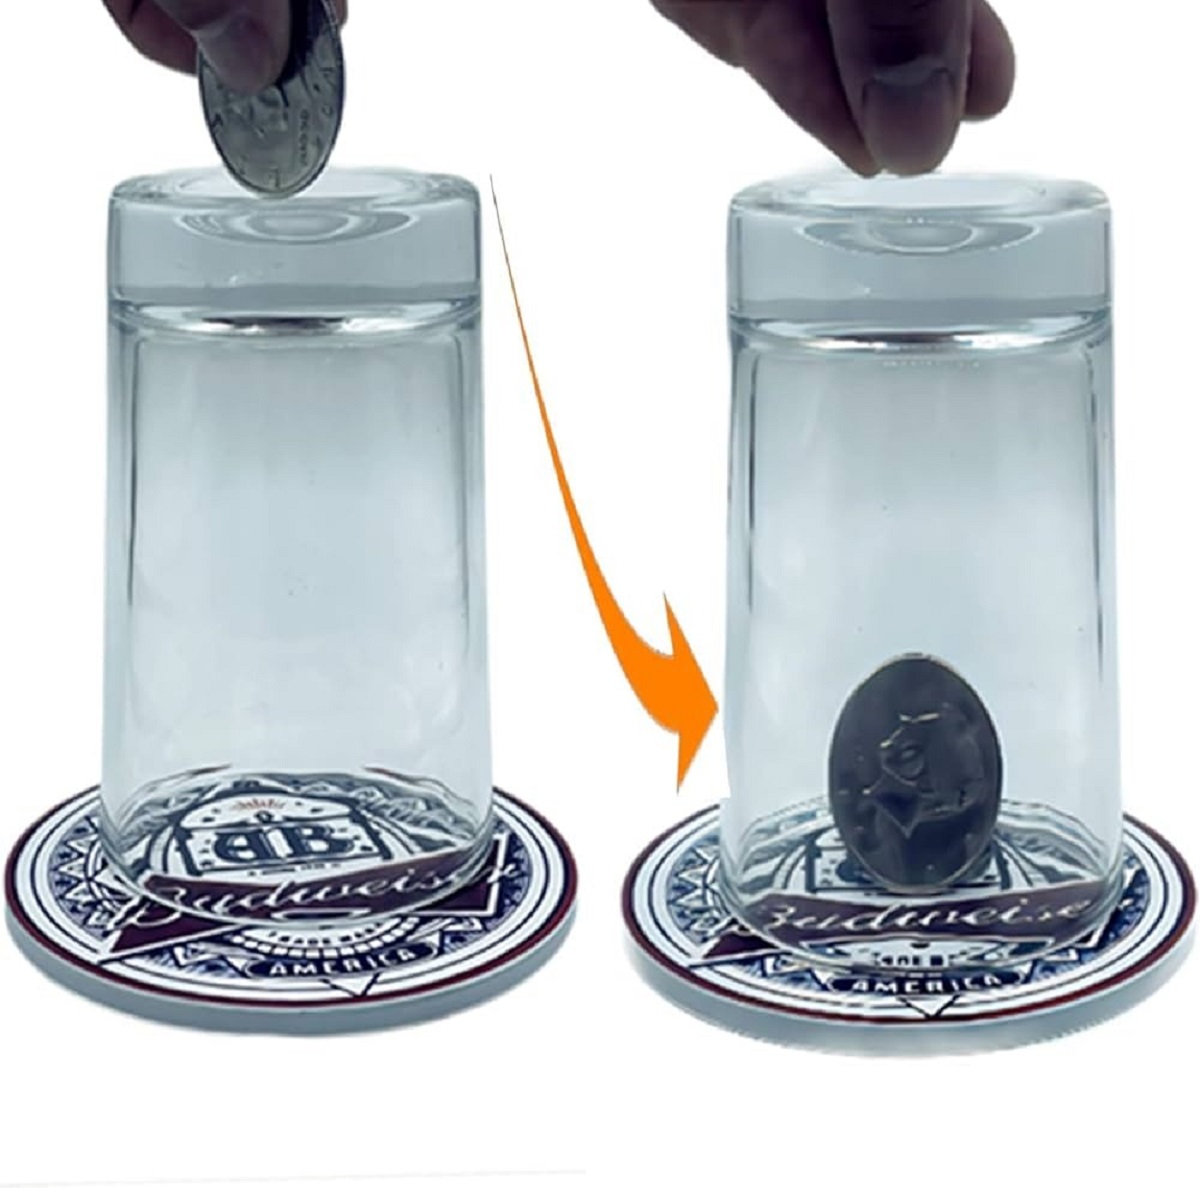 This classic magic trick never fails to amaze friends. Watch as the magician seemingly effortlessly pushes a coin through an ordinary, unyielding glass. Starting with the coin in their palm, they tap the glass several times, each tap causing the coin to mysteriously move closer. With each tap, the magician subtly adjusts their grip until, with a final tap, the coin is at their fingertips. A quick, stealthy toss sends the coin into the glass, leaving the audience clueless to the sleight of hand mastery required.